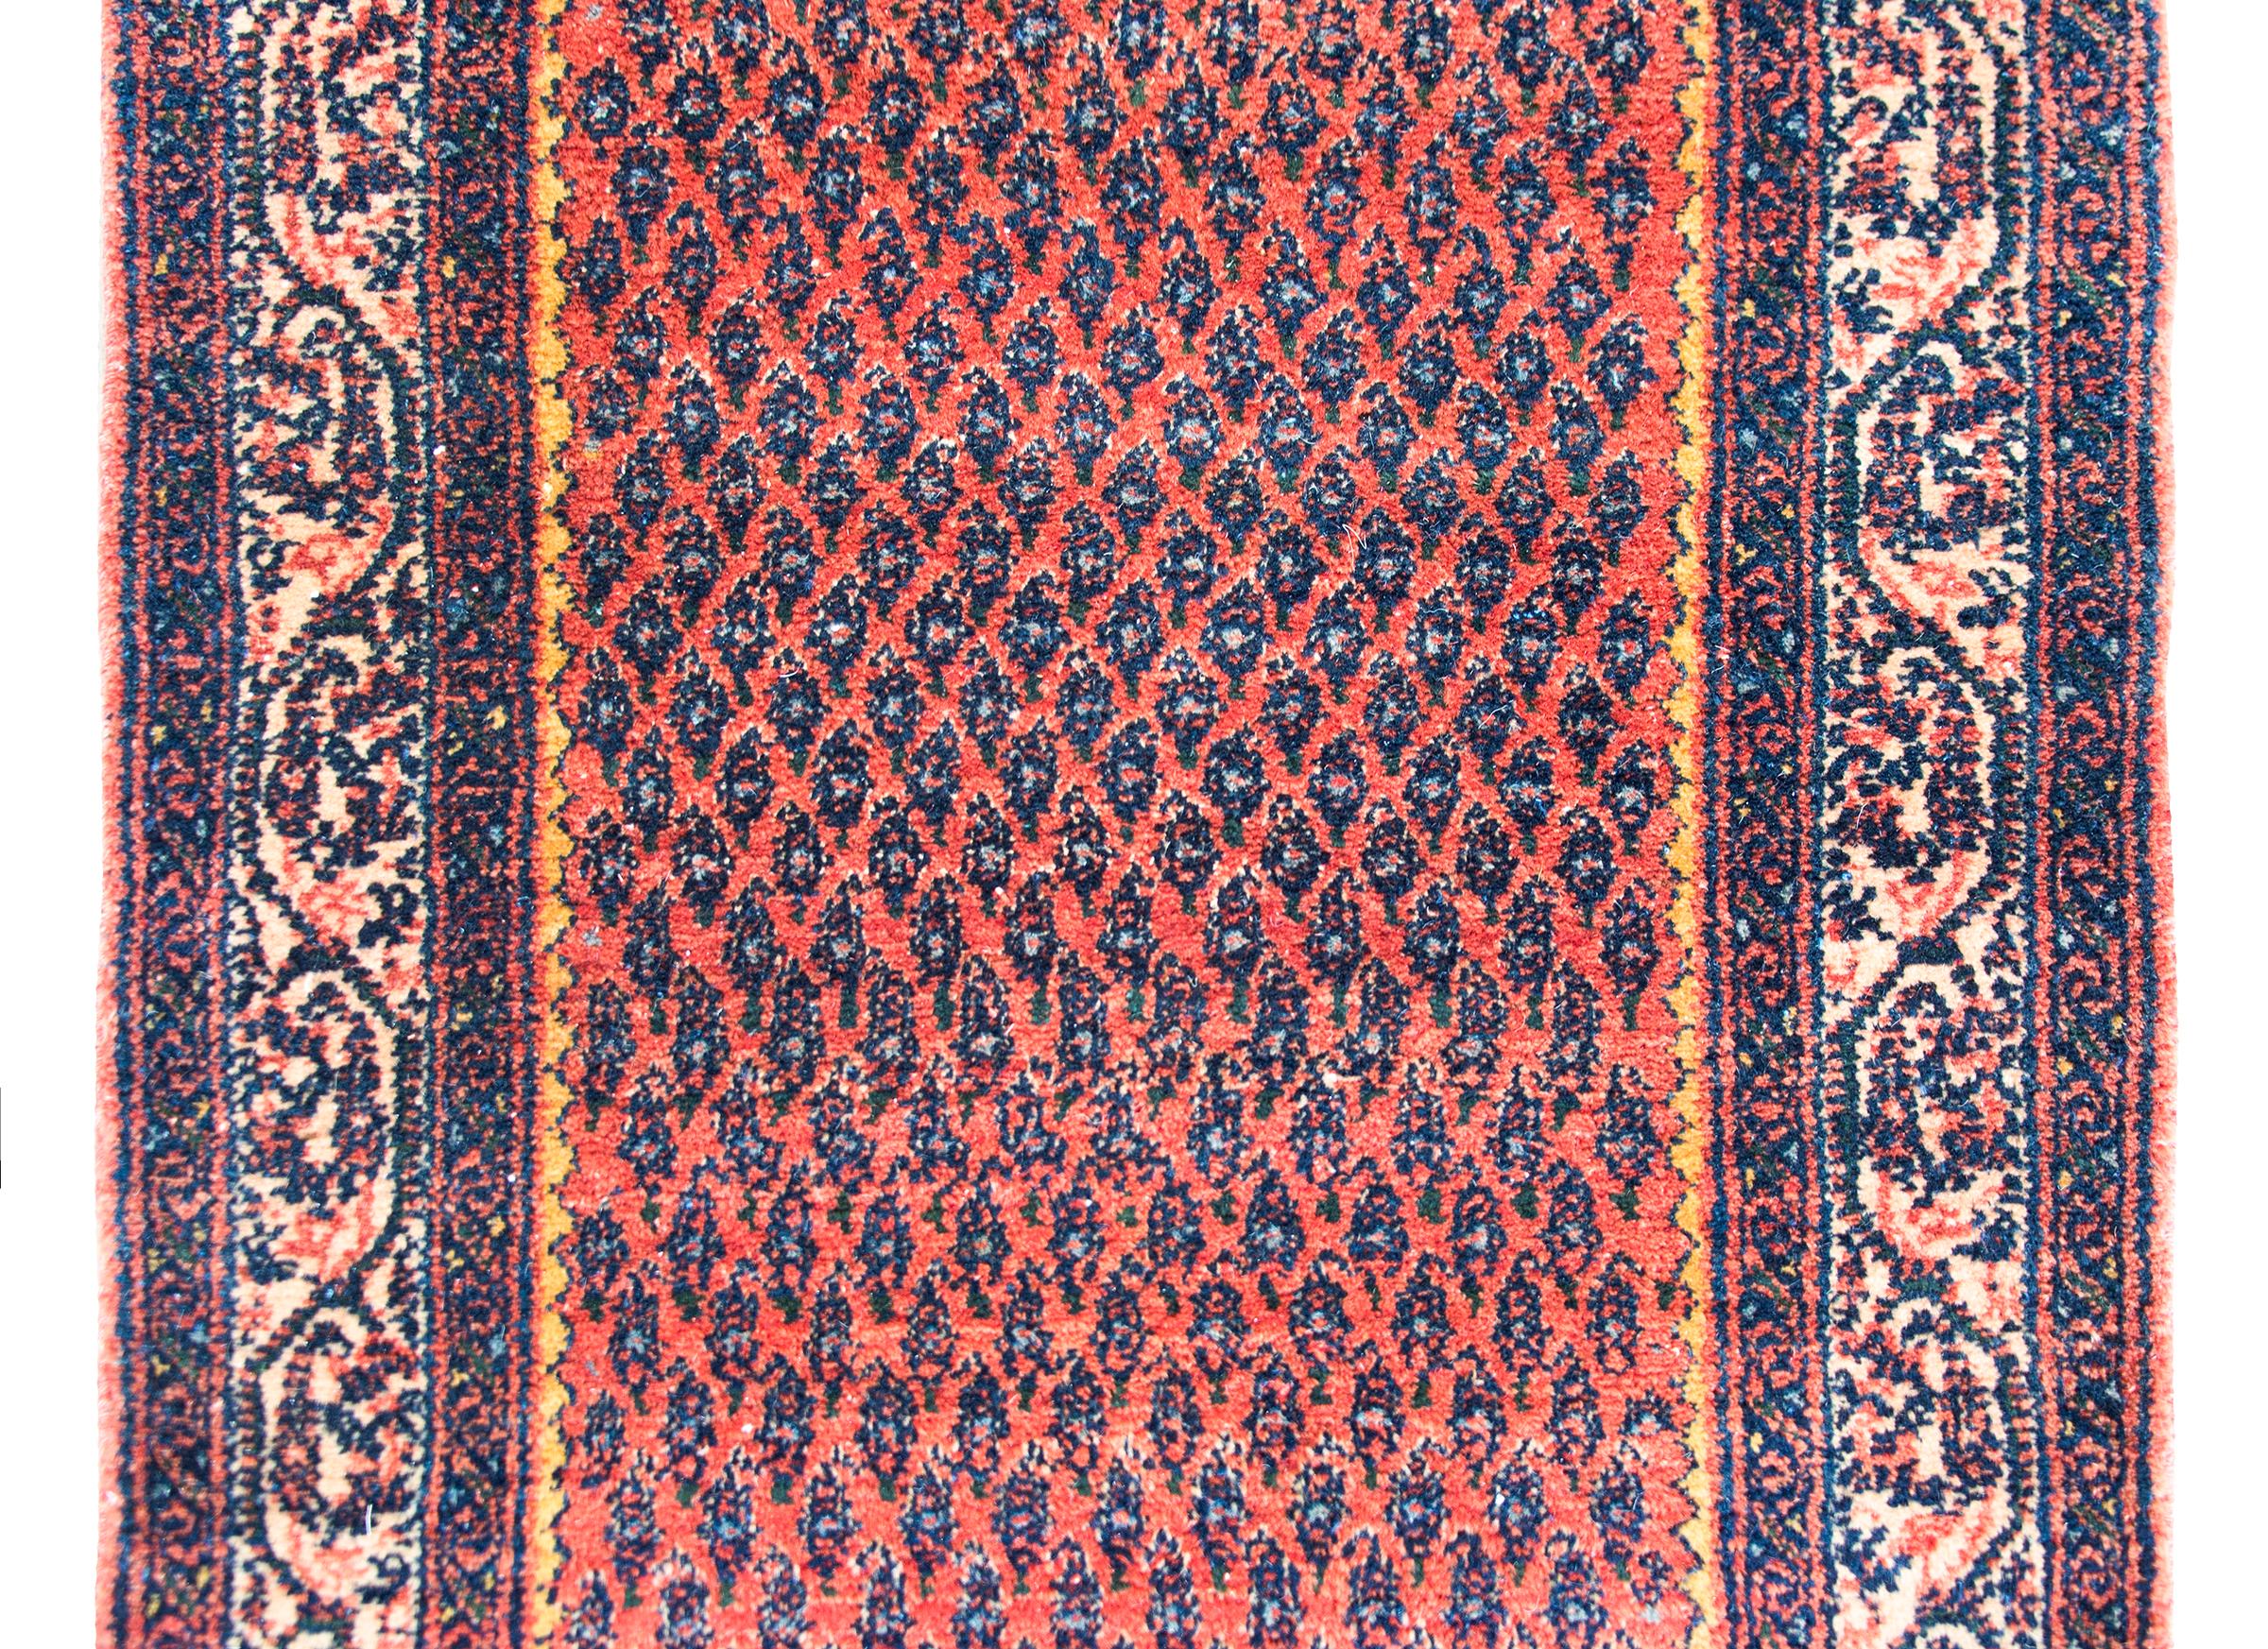 An early 20th century Persian Seraband runner with an all-over paisley pattern surrounded by a wide paisley patterned border and all woven light and dark indigo gold and pink, set against an abrash crimson background.